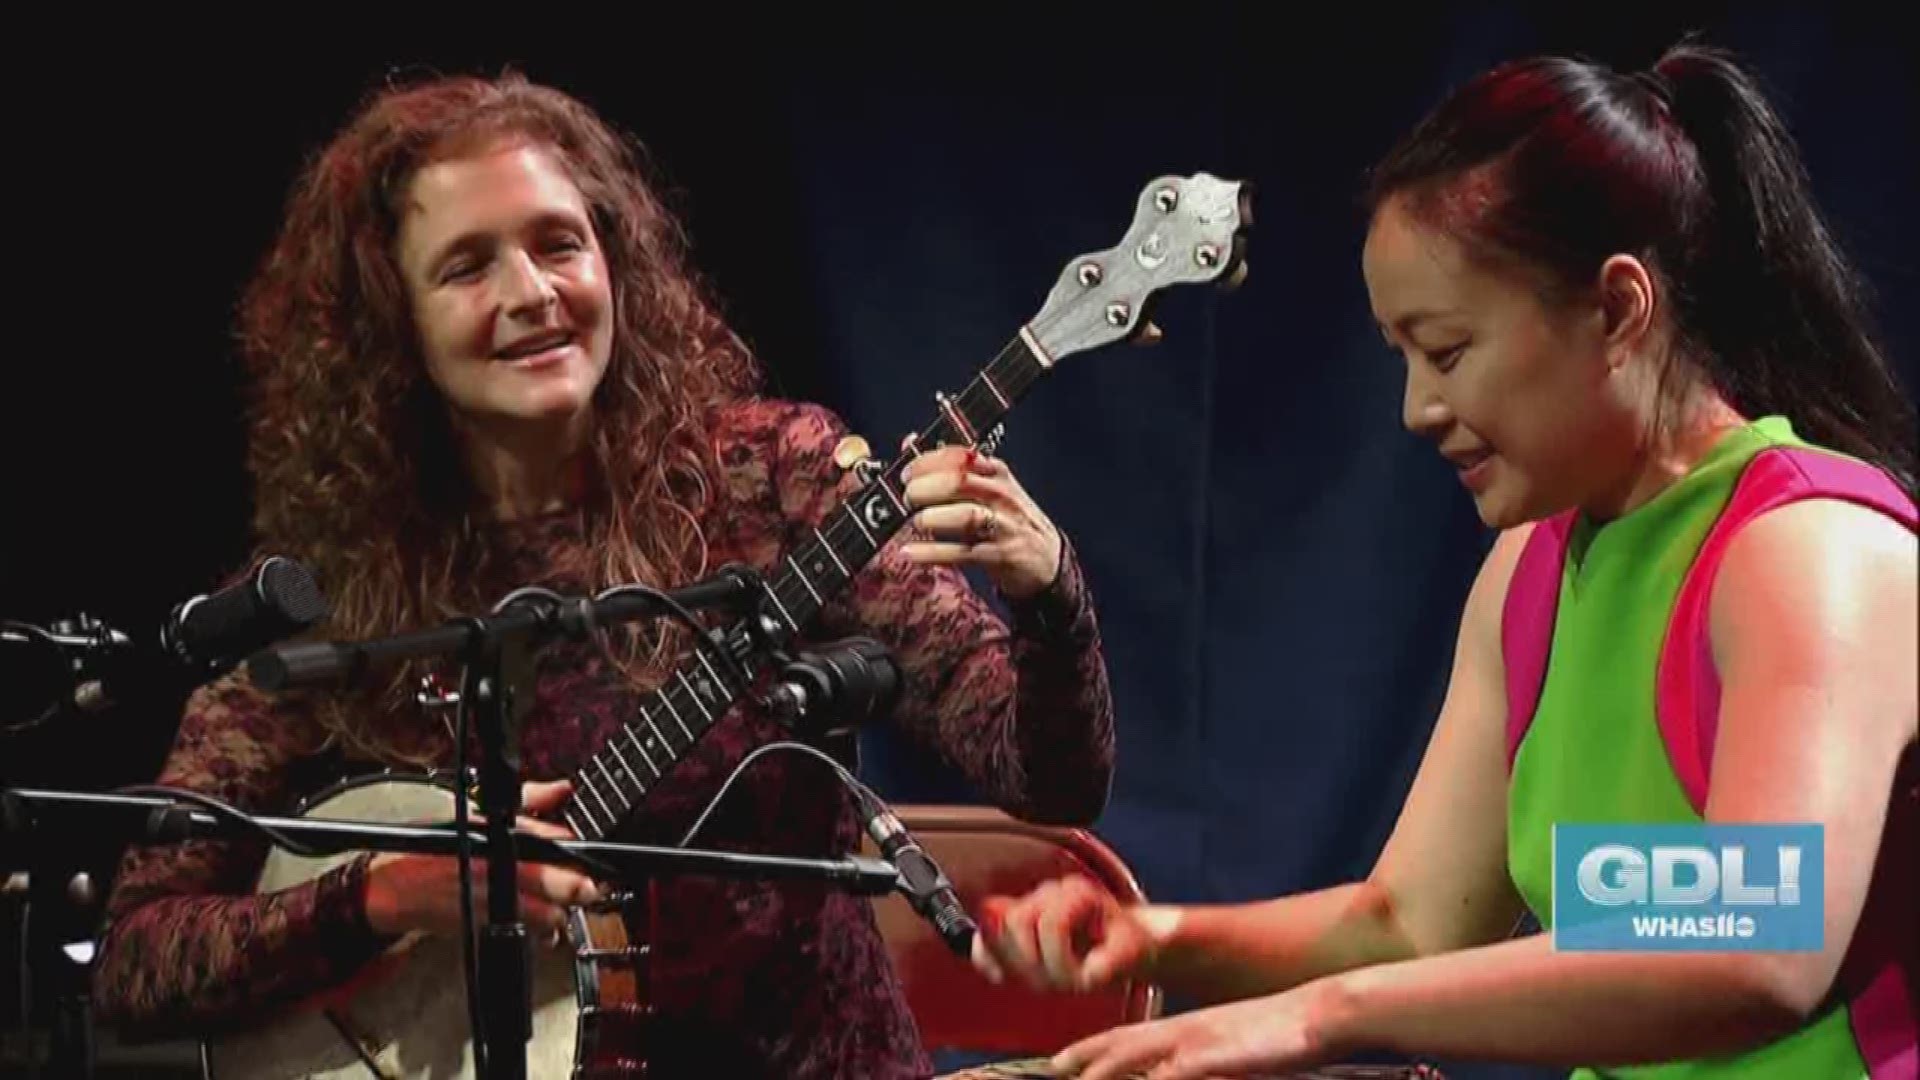 Abigail Washburn, who is a Grammy Award winning vocalist, songwriter and banjo player, stopped by Great Day Live with composer and virtuoso musician Wu Fei to perform a couple songs.